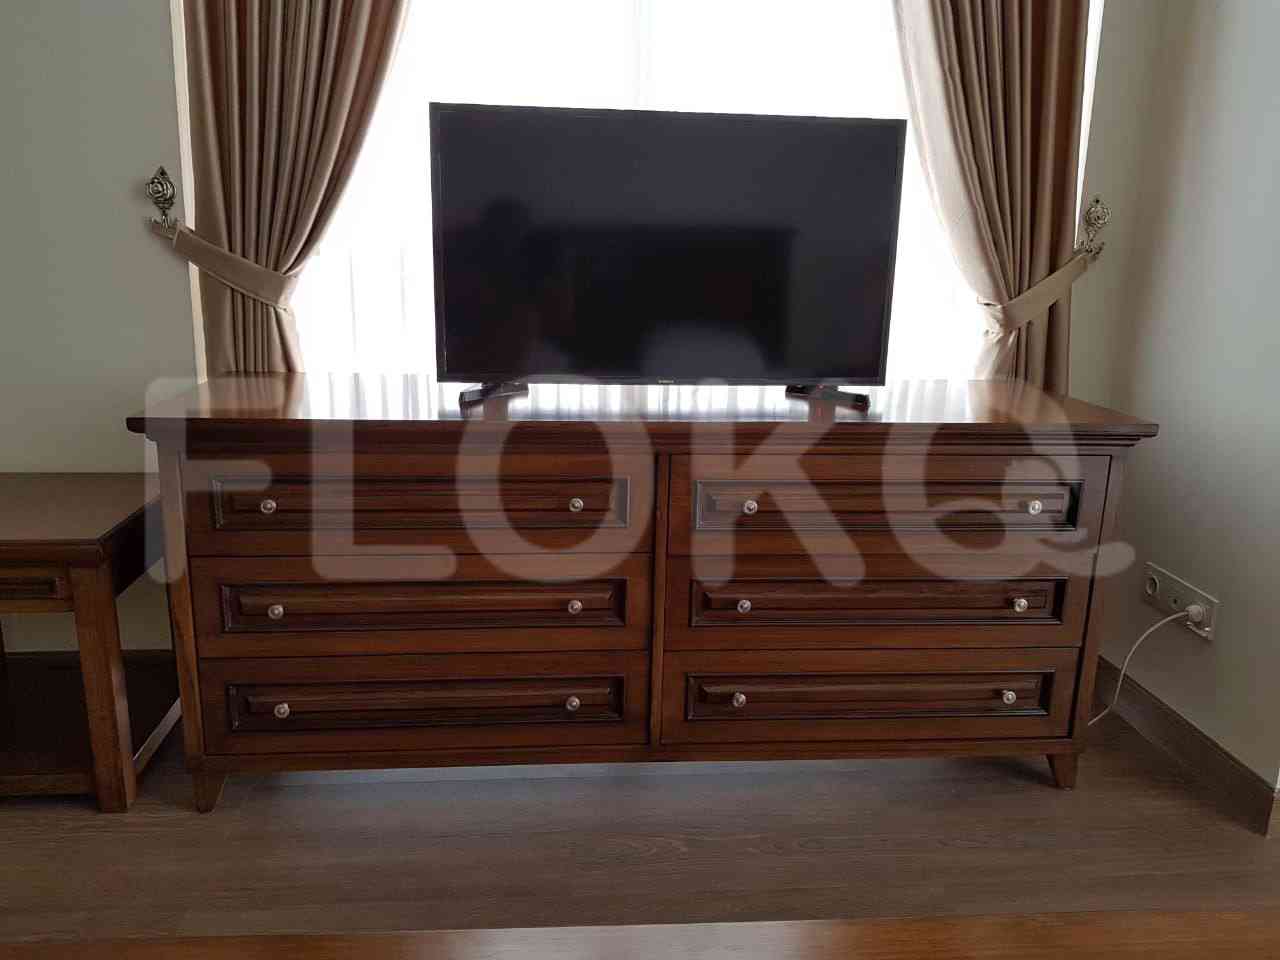 2 Bedroom on 18th Floor for Rent in Pakubuwono Spring Apartment - fga4a1 3